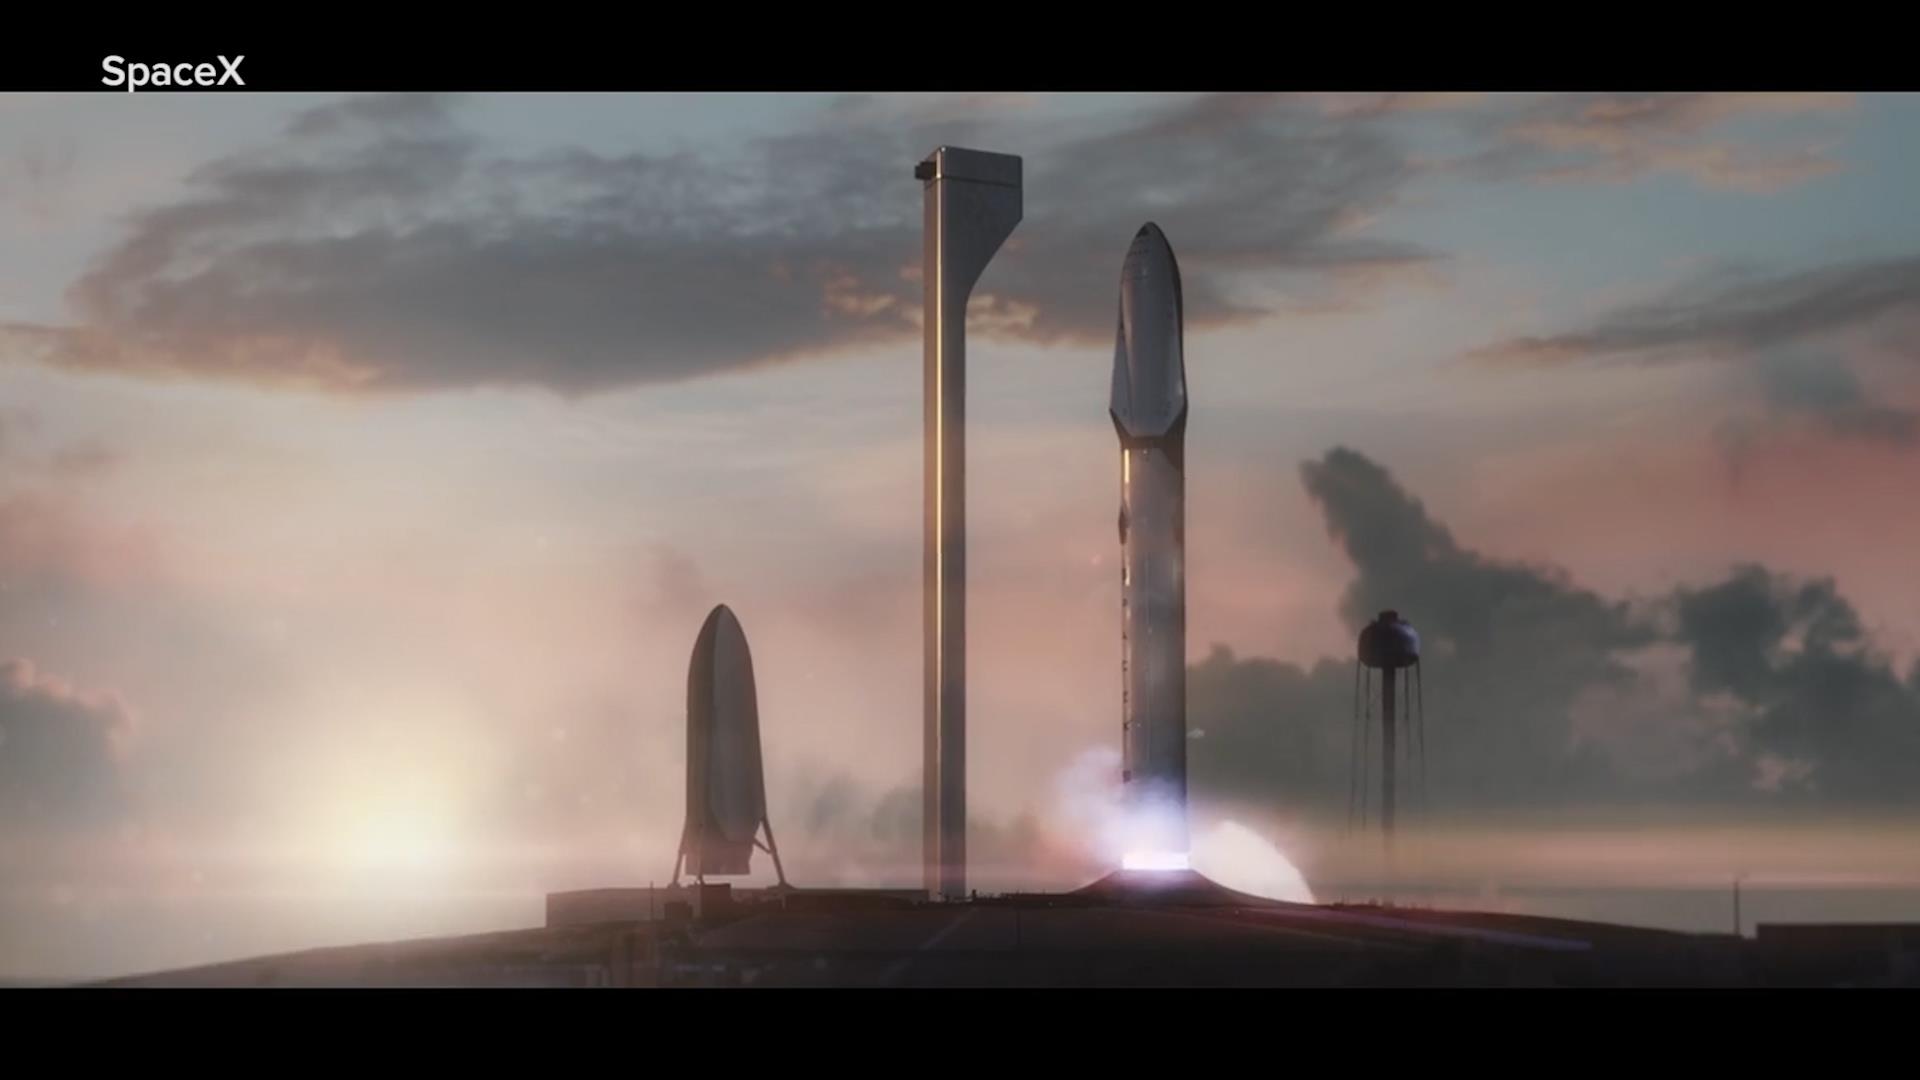 Elon Musk's Mission to Mars Aims for 2022